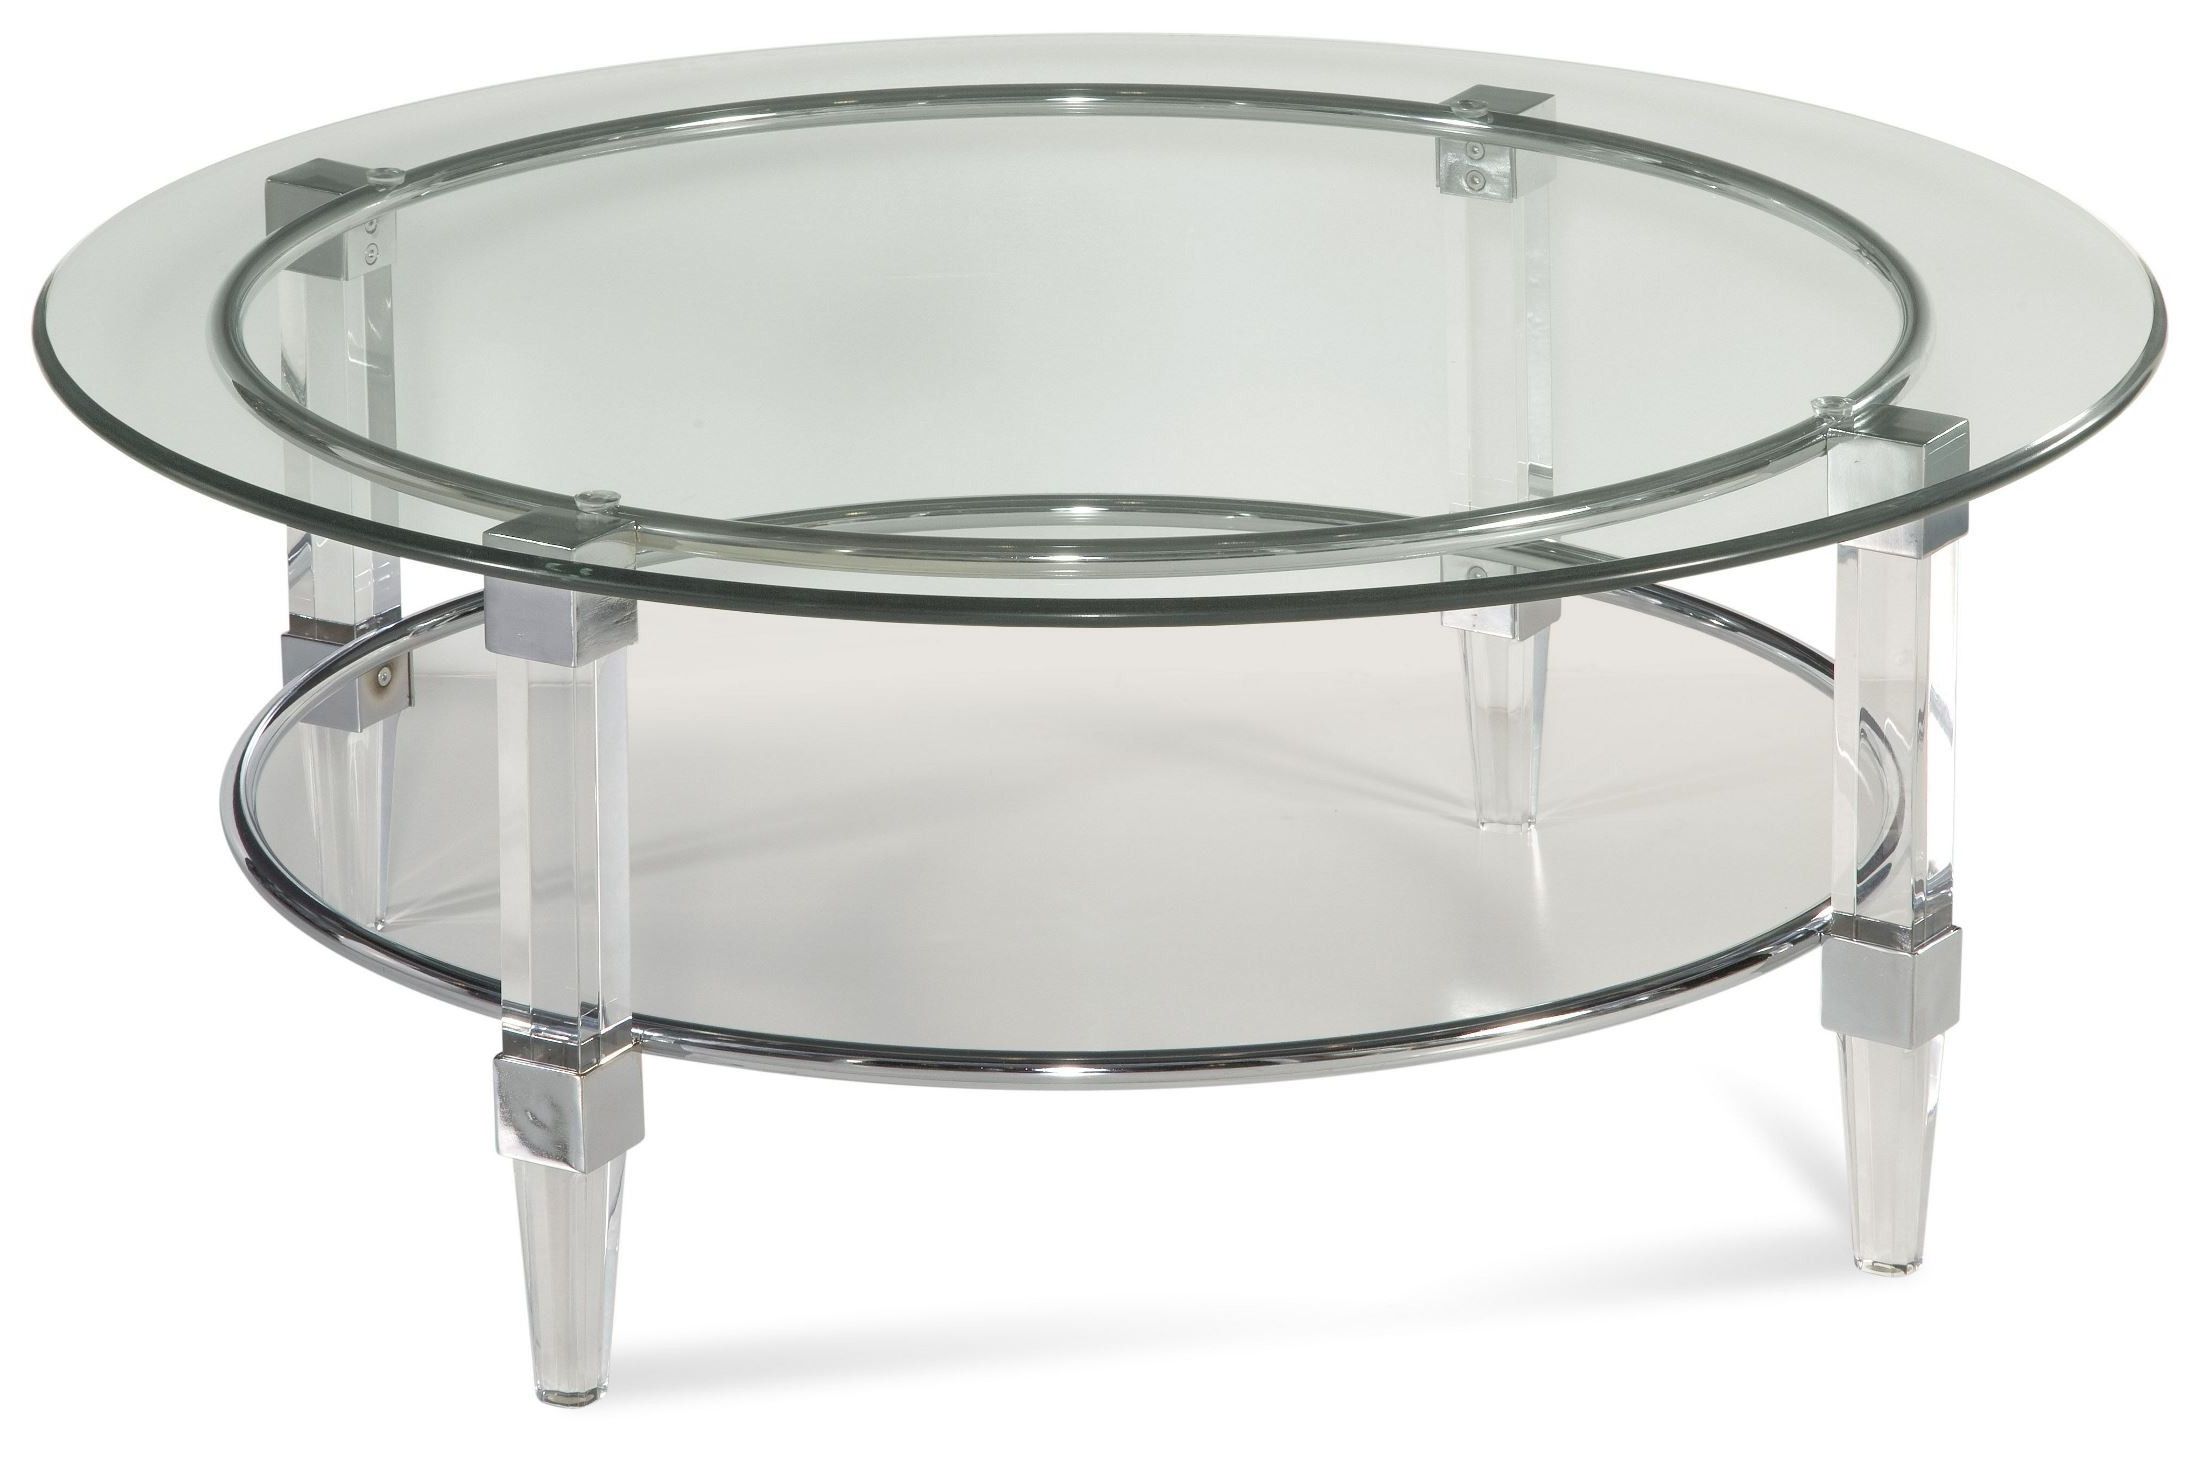 Cristal Acrylic And Chrome Cocktail Table, 2929 120ec Within Most Current Glass And Chrome Cocktail Tables (Gallery 9 of 20)